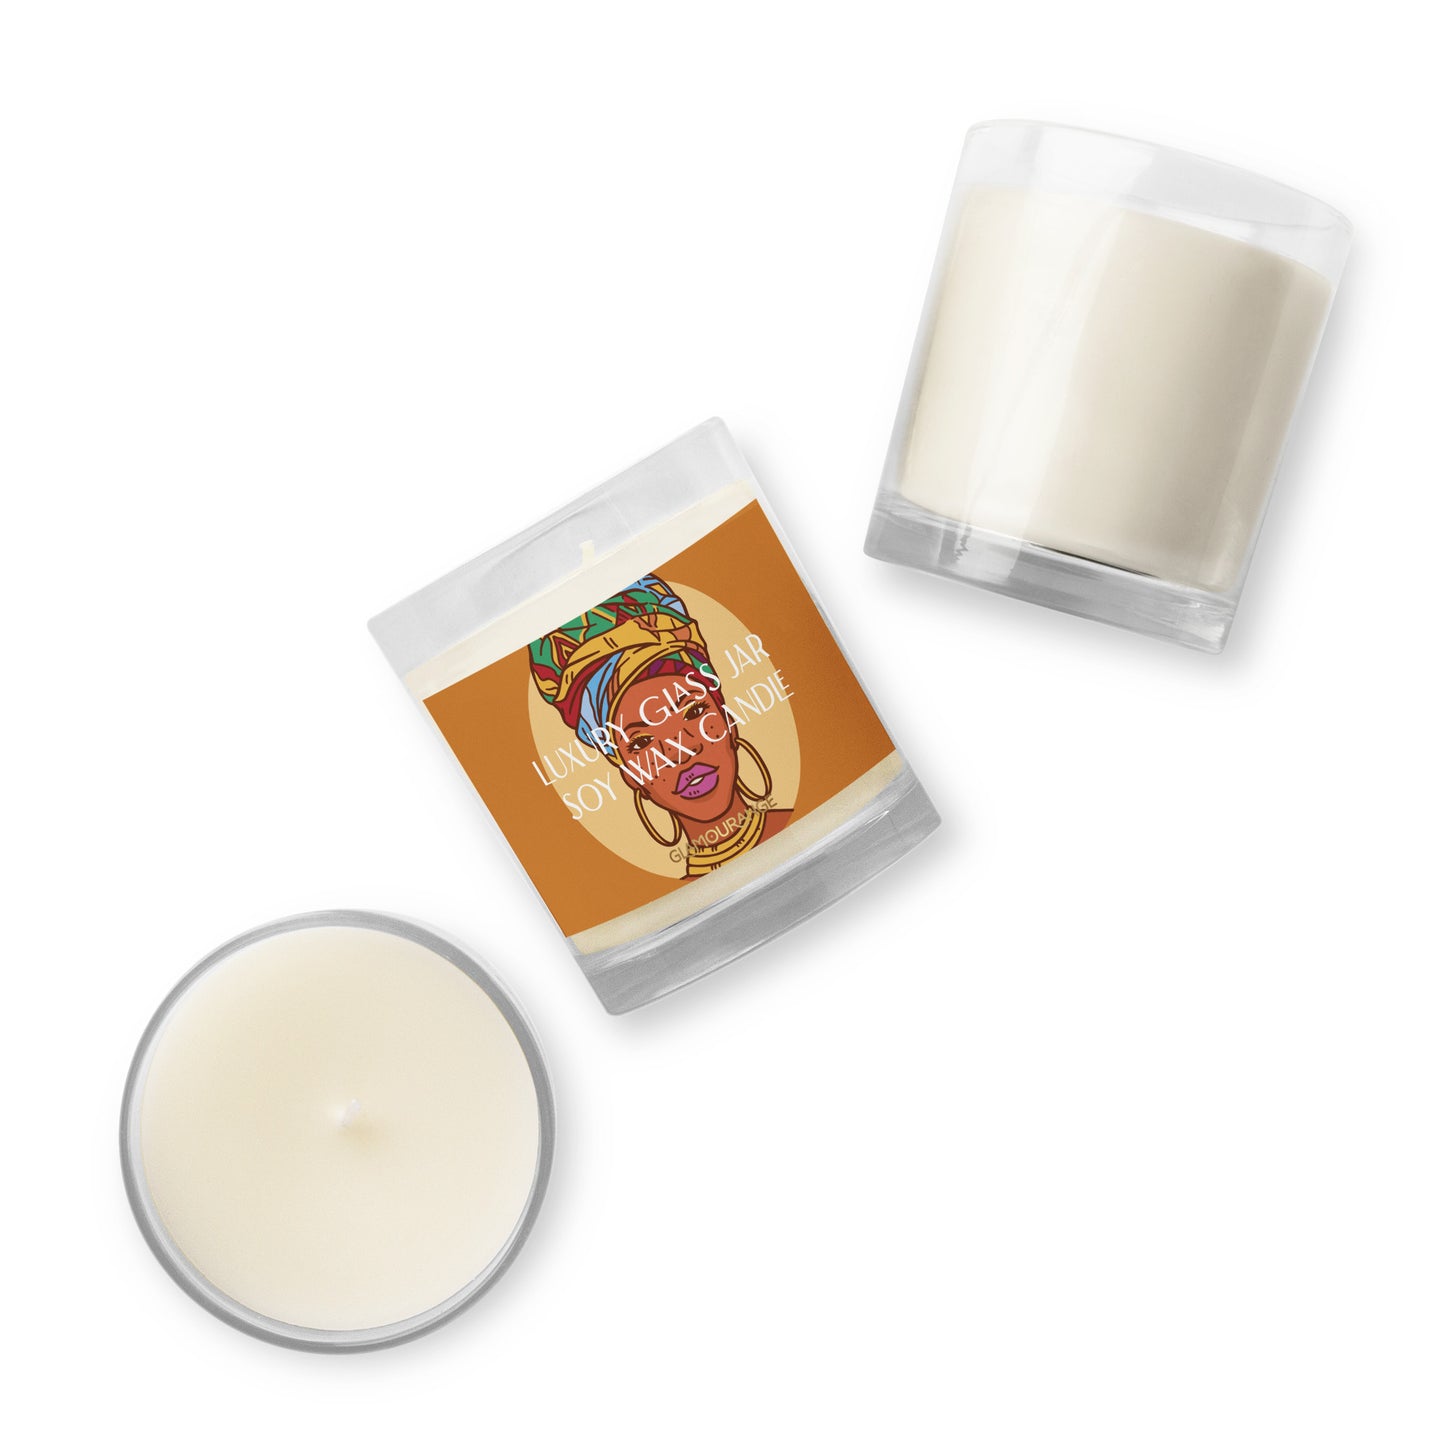 Glass Jar Soy Wax Candle (African Beauty - People Label 0036)